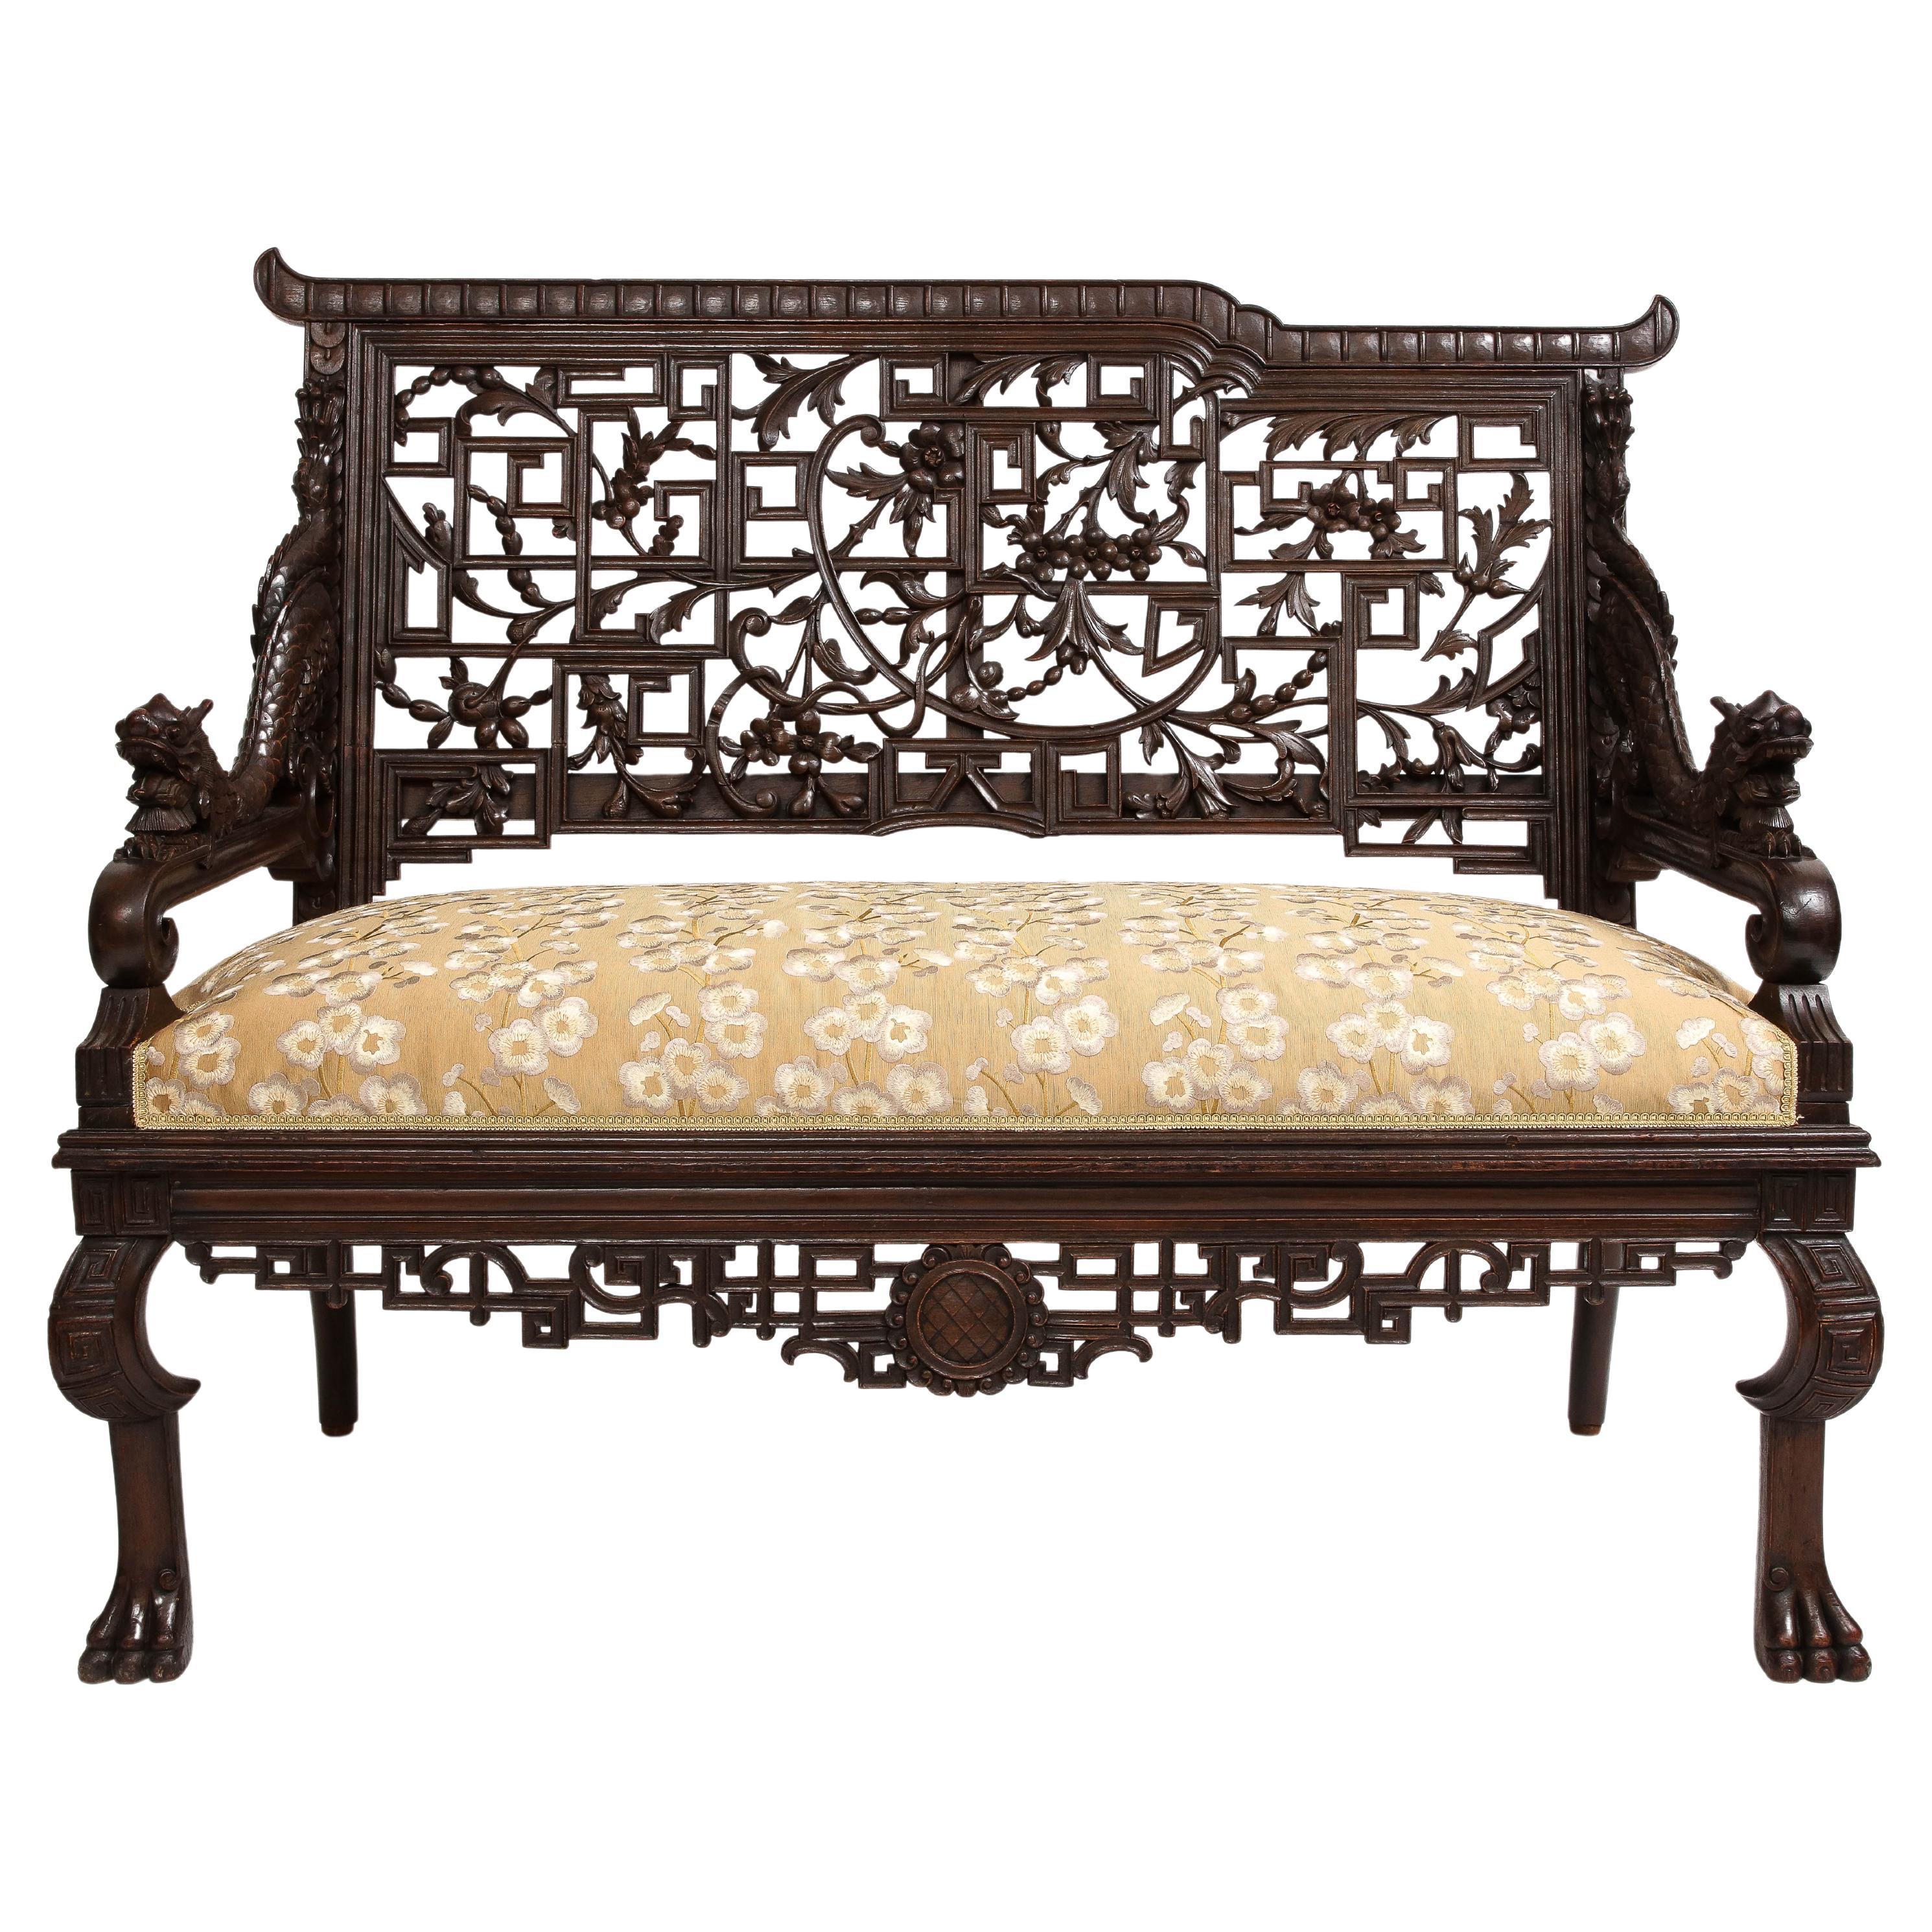 An Incredible 19th Century French Hardwood Japanism Sofa, by Gabriel Viardot. The backrest of this exceptional sofa is adorned with a stunning display of carved open fret-work designs, masterfully intertwined with delicate scrolls and foliate